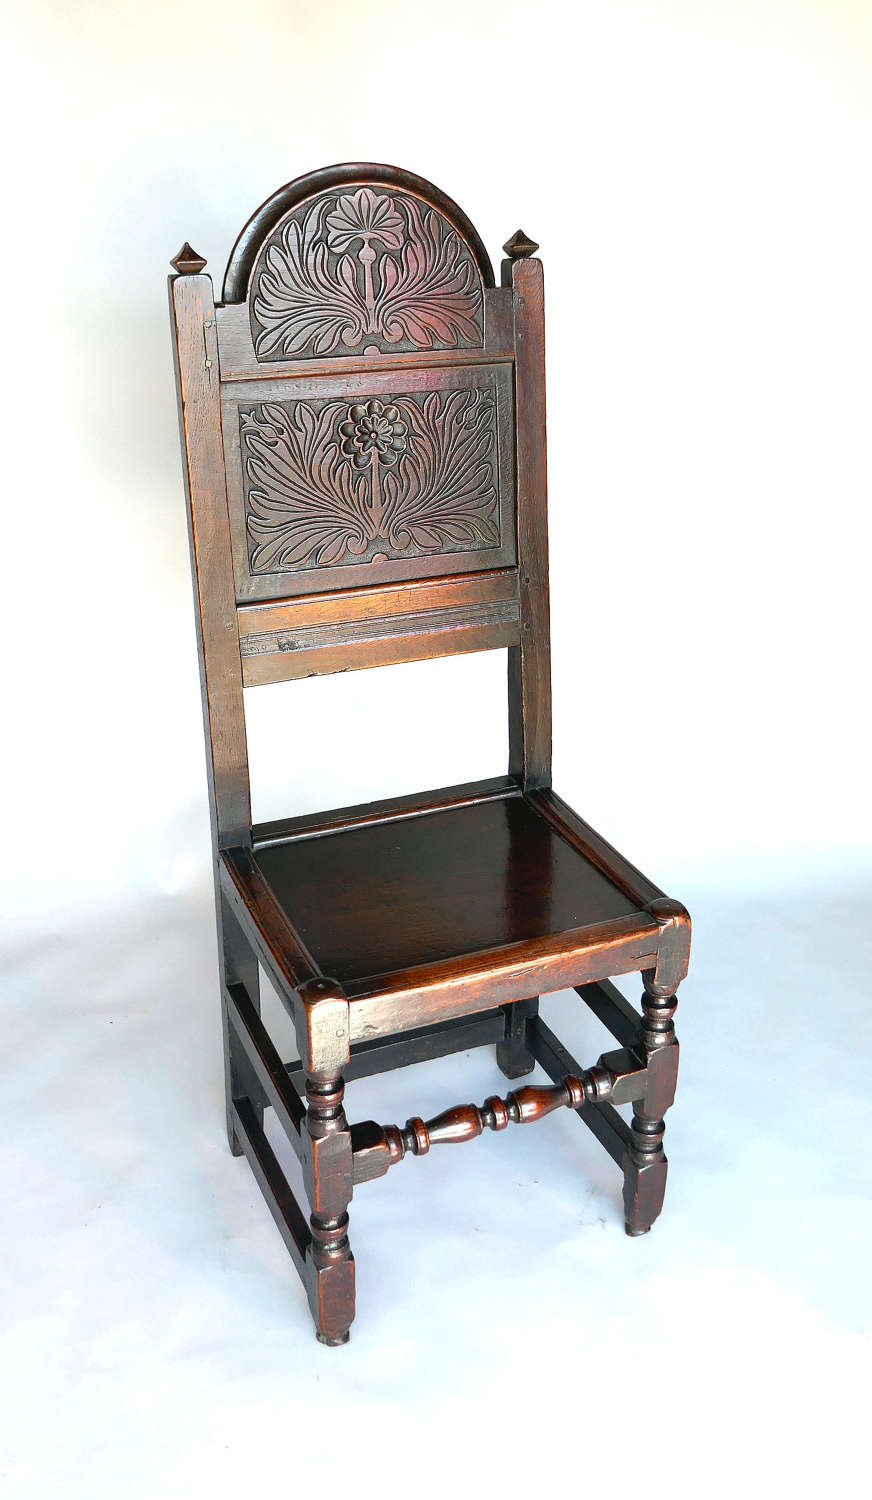 17thc Period Oak Chair With Well Carved Arched Cresting Rail.  English